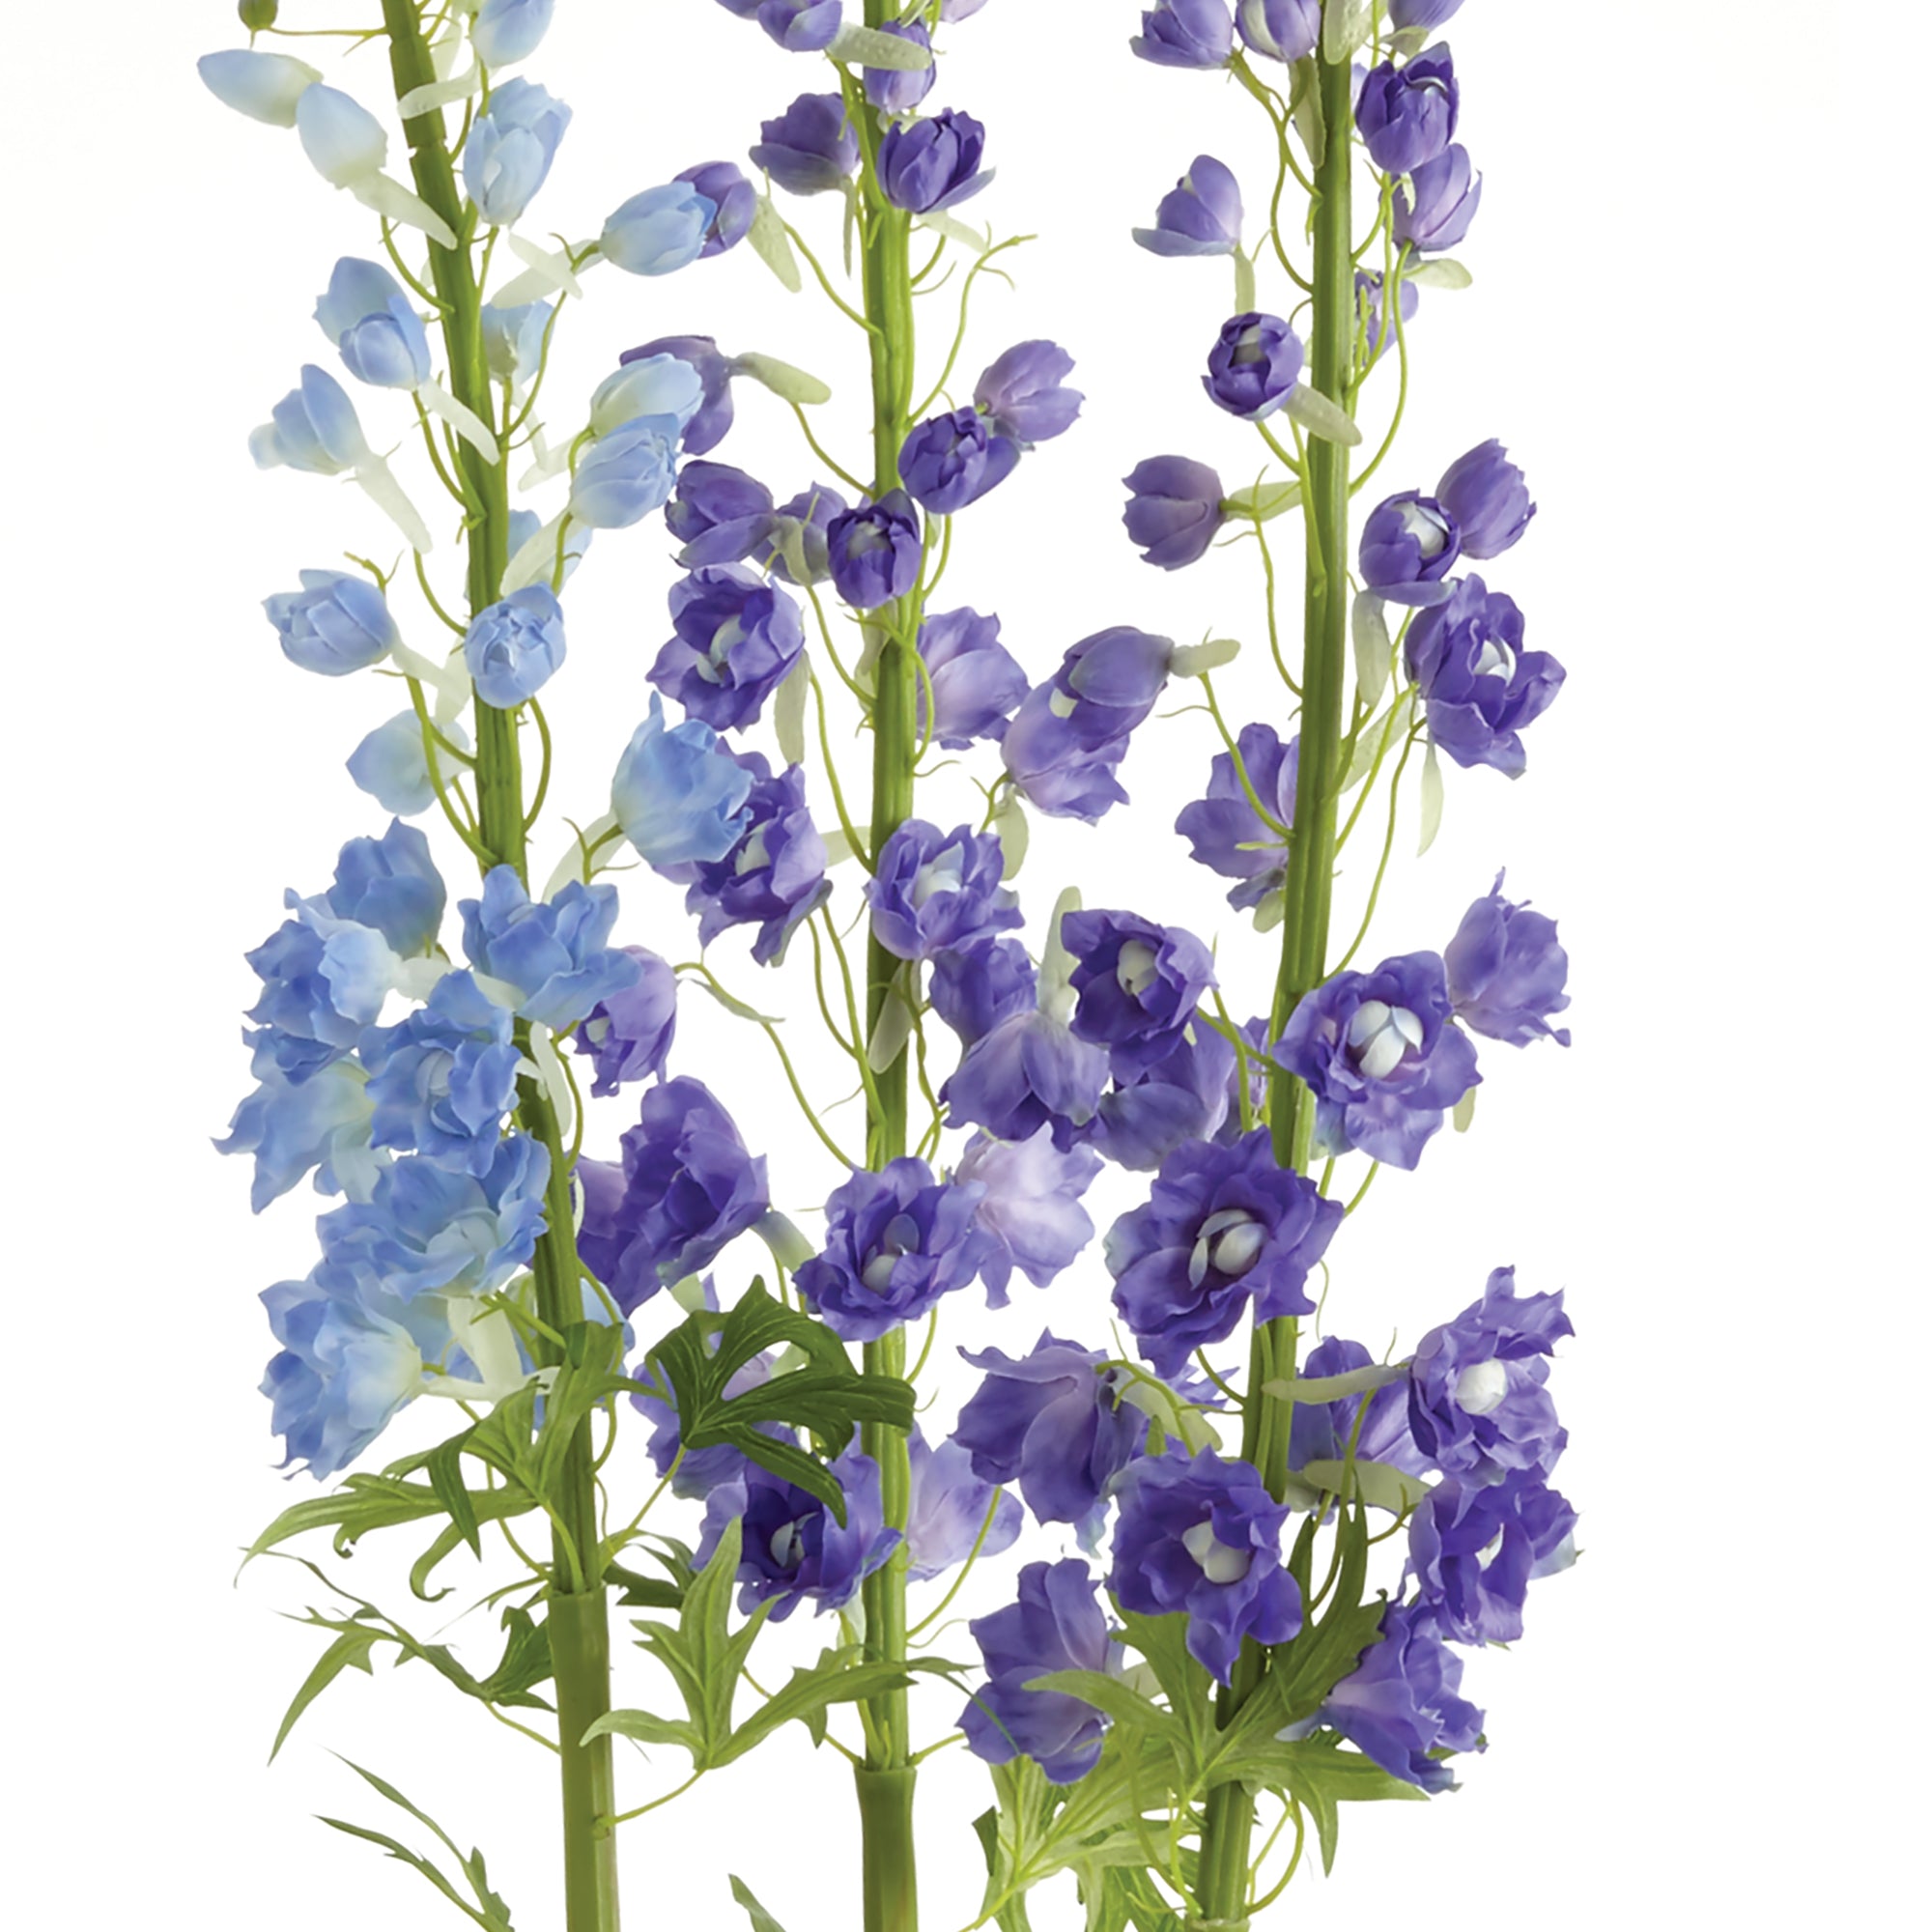 Florals are an essential design element. If done right, they can make all the difference. These potted Delphiniums add height and soothing pop of violet to any space. Amethyst Home provides interior design, new construction, custom furniture, and area rugs in the Houston metro area.